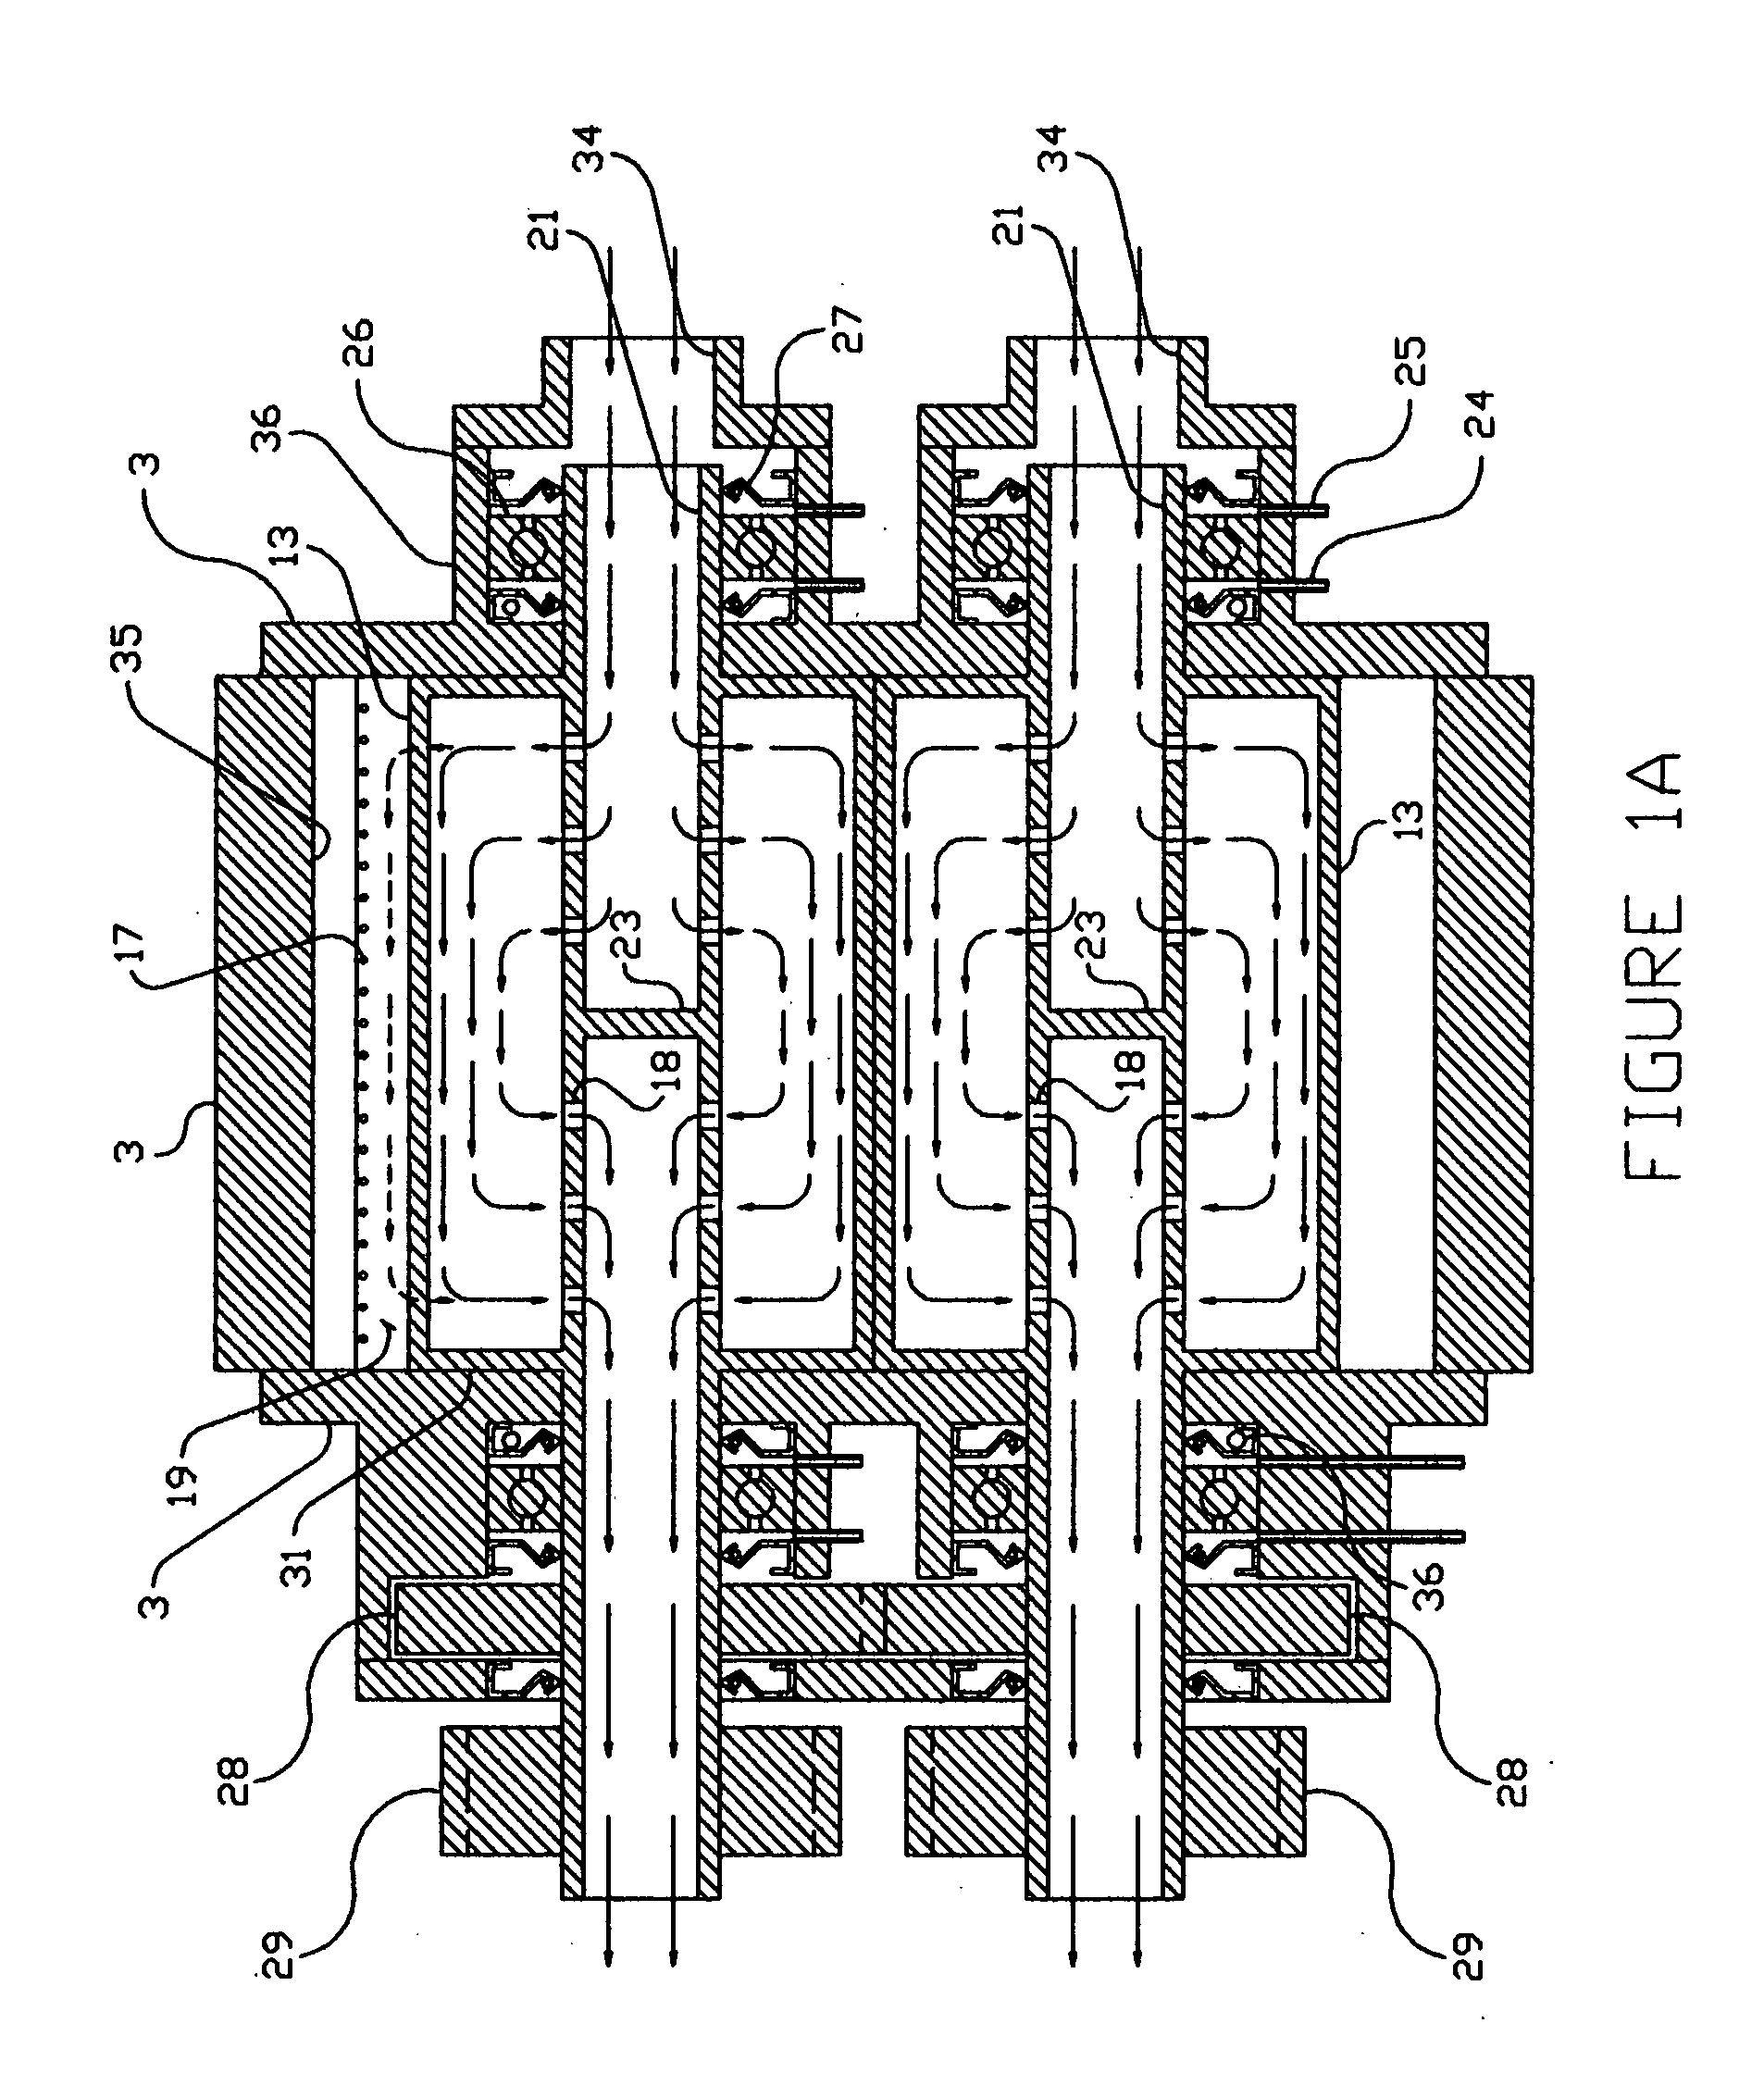 Open-cycle internal combustion engine